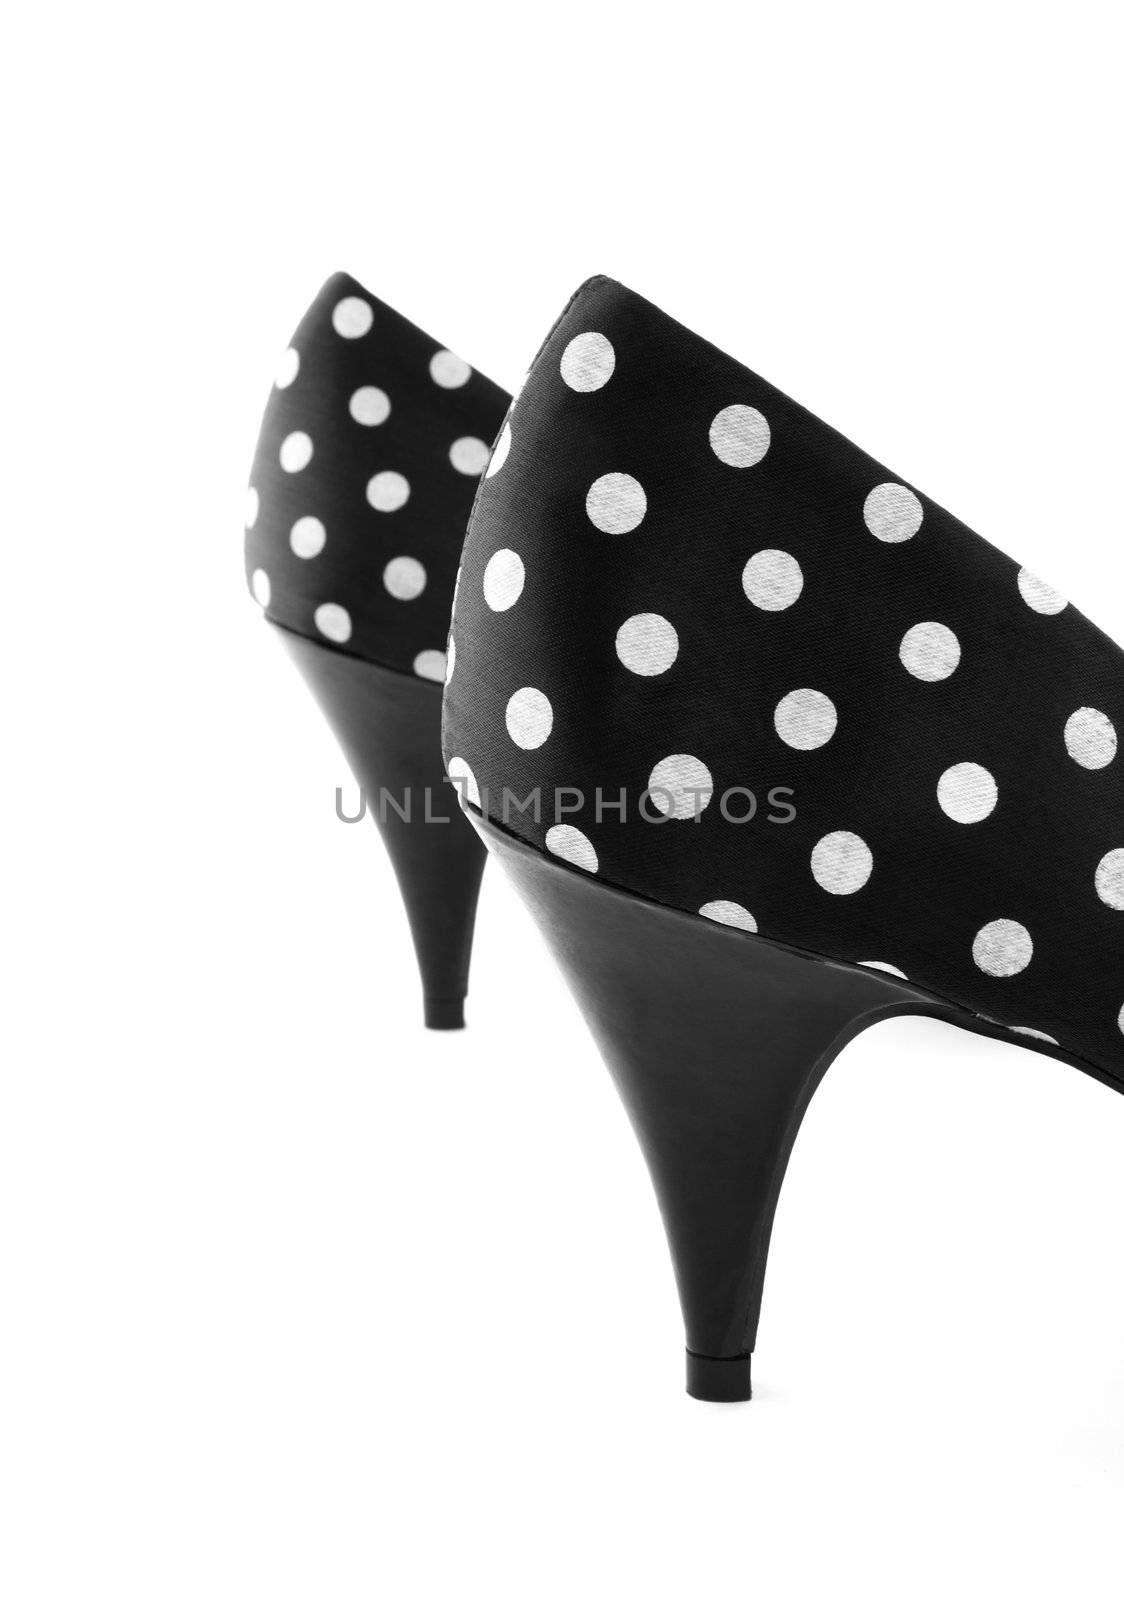 Black classic high heel polka shoes. Focus on the closest shoe.